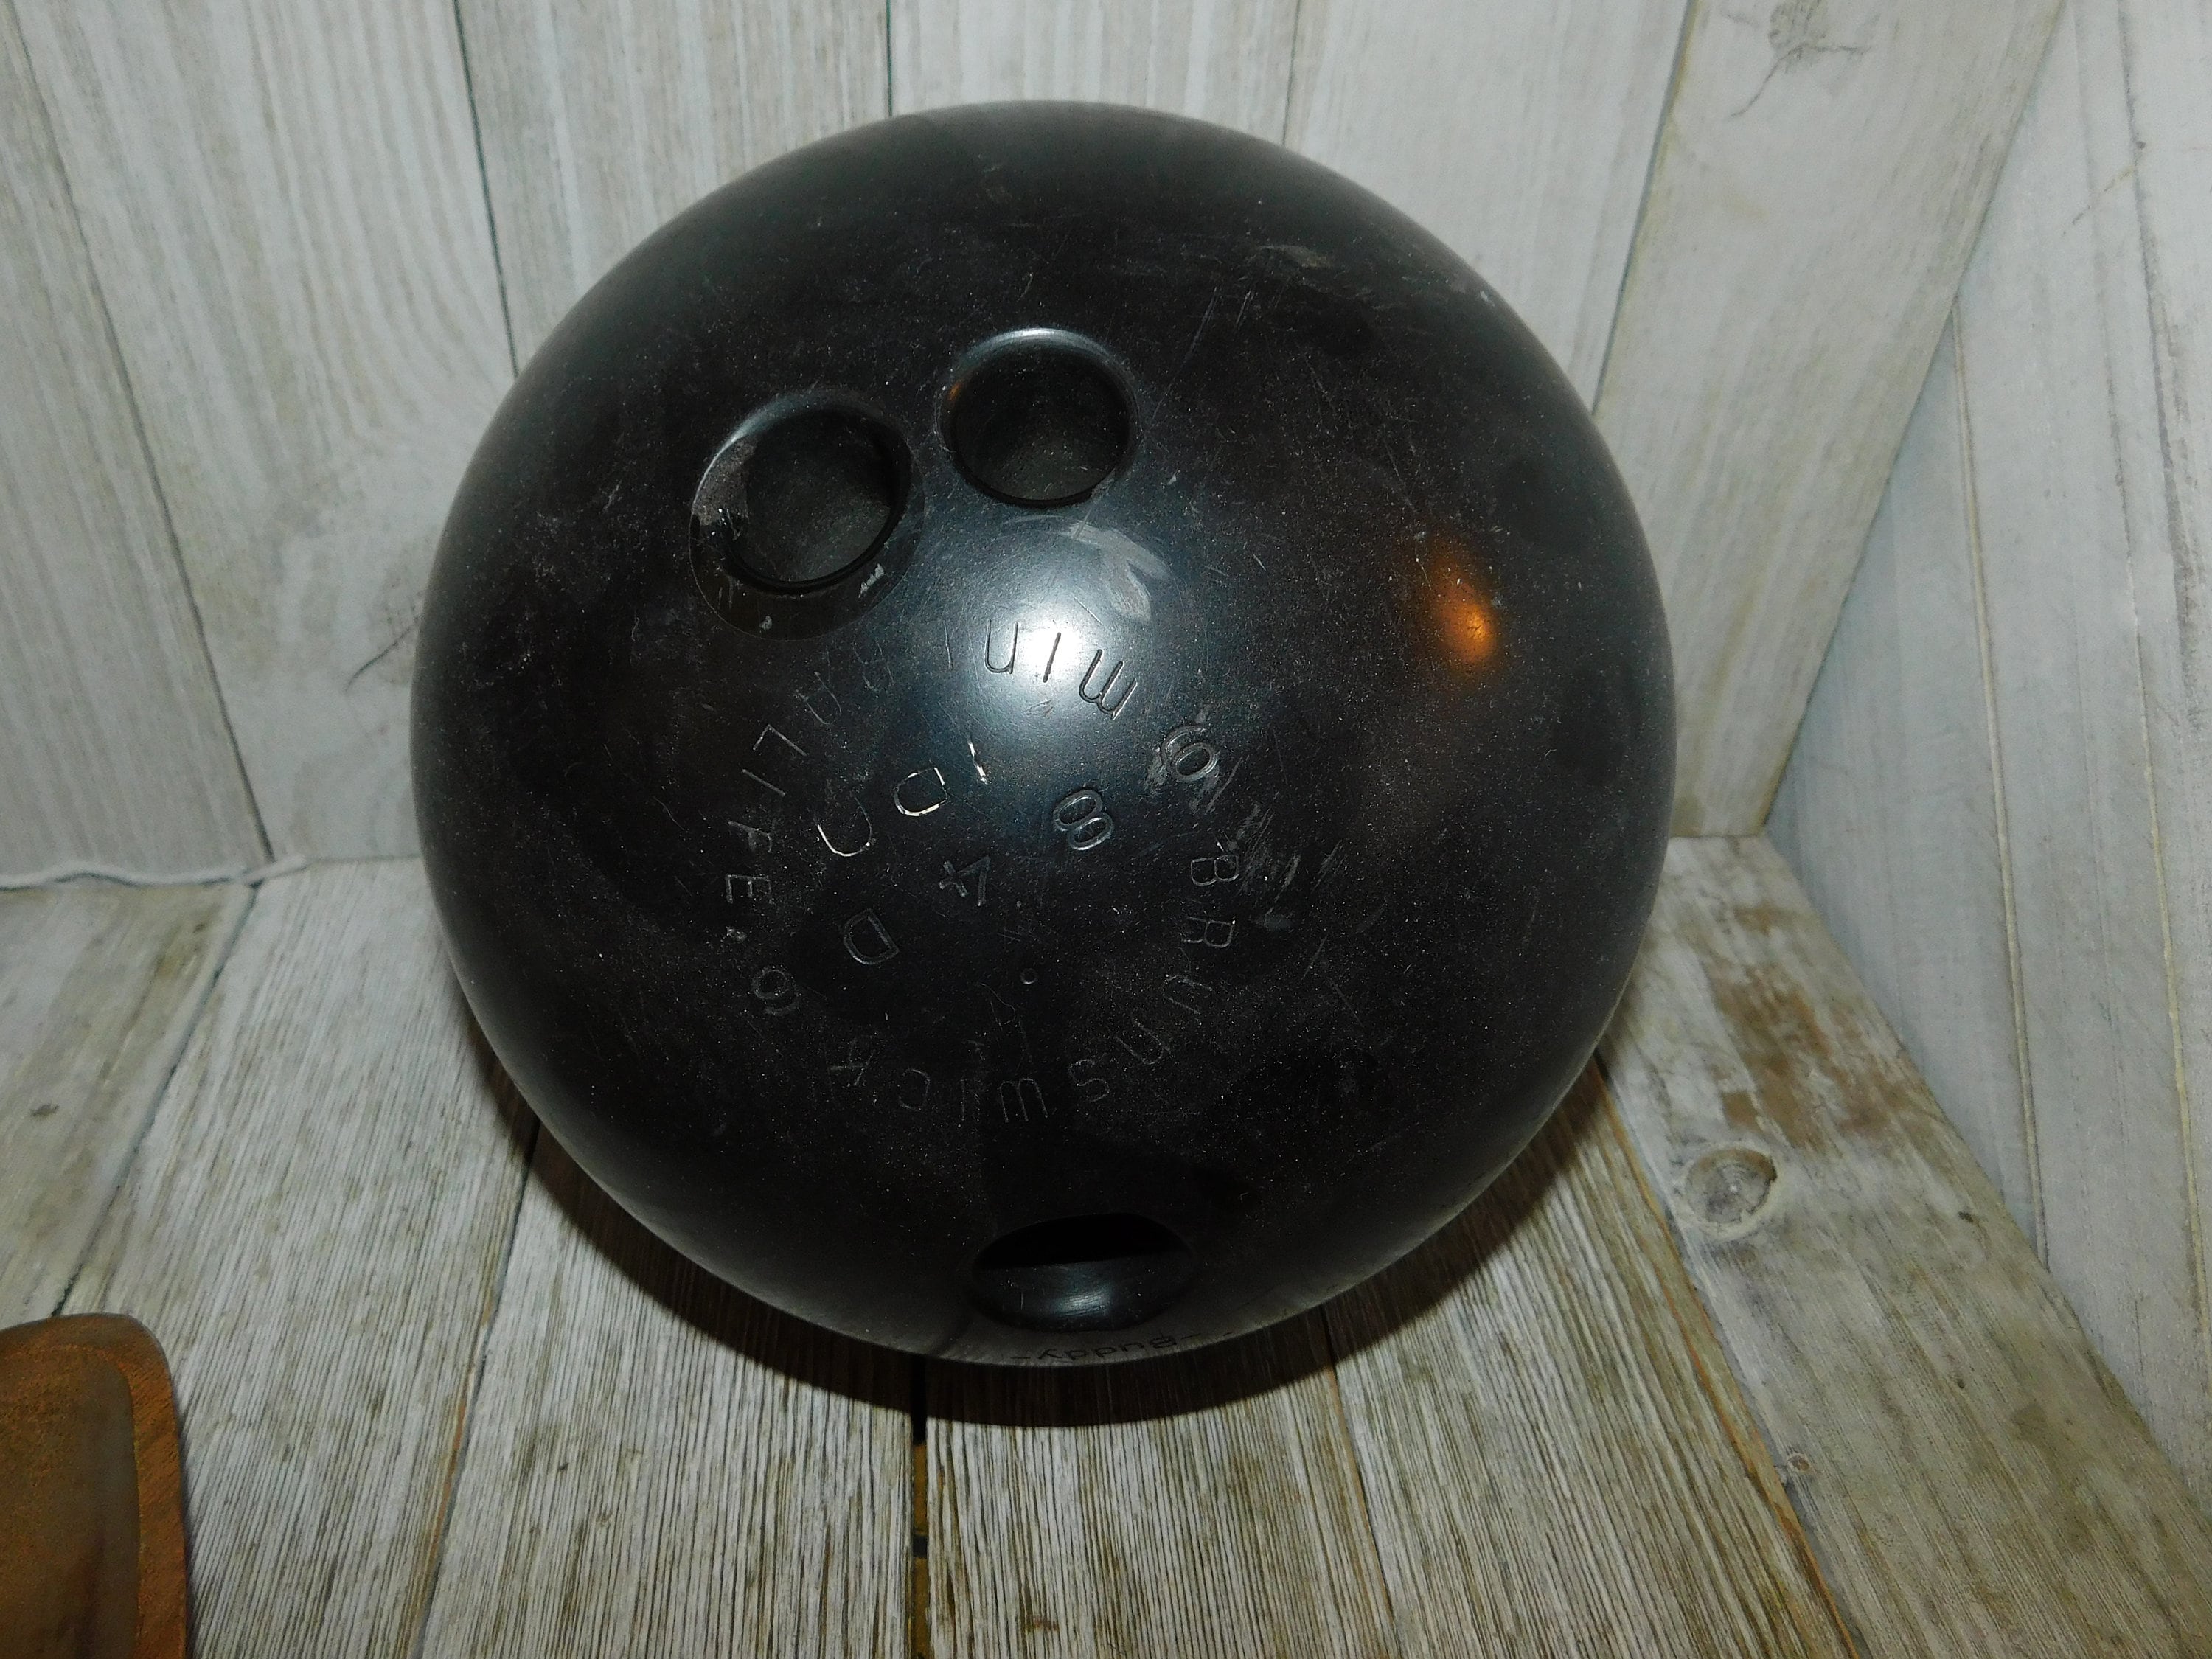 Vintage bowling ball and bag - Sports & Outdoors - South Parkersburg, West  Virginia, Facebook Marketplace